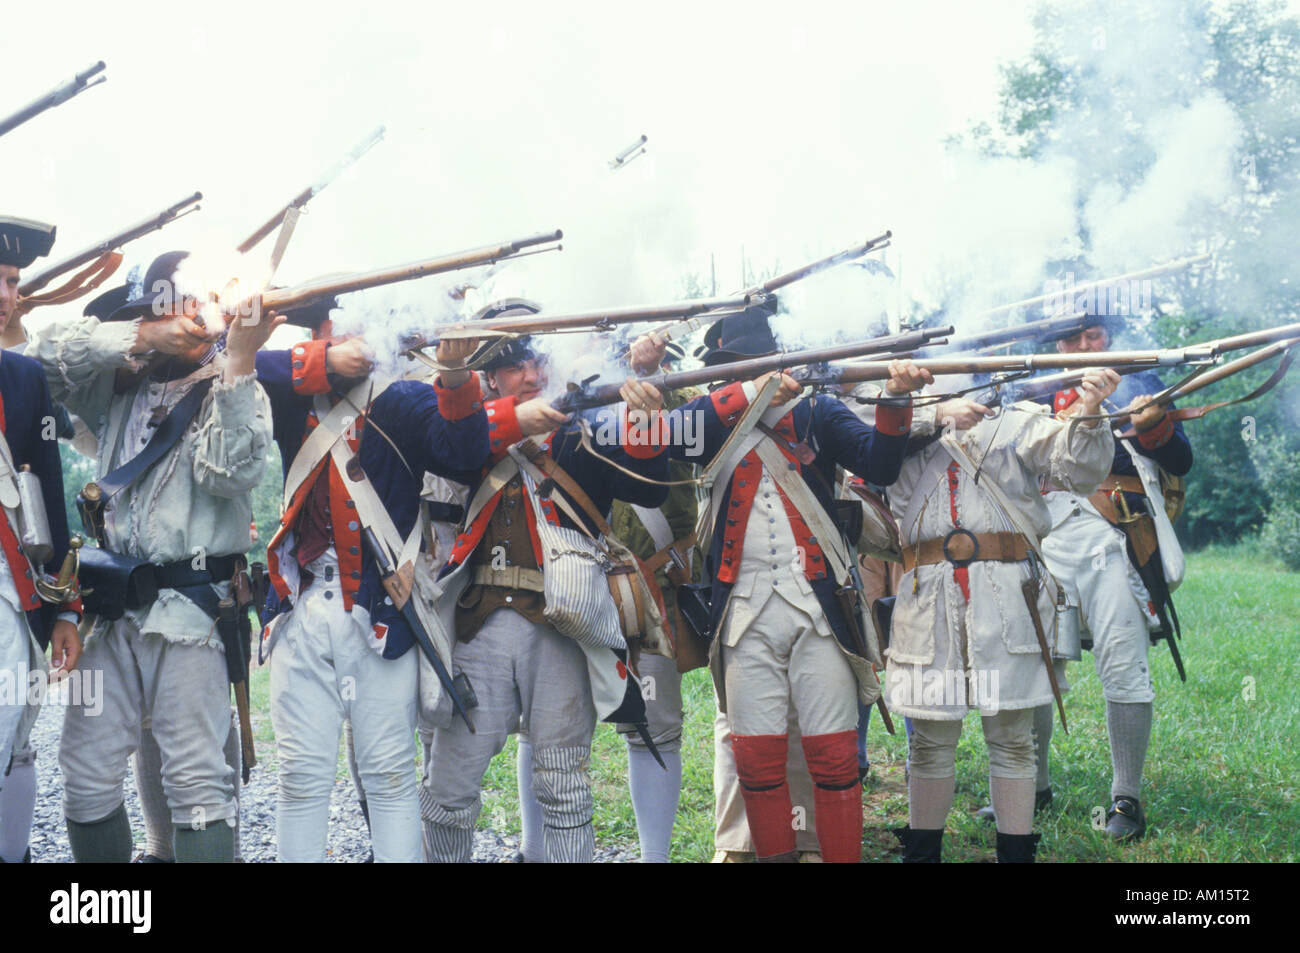 Men dressed in 18th century American military infantry costume fire muskets during reenactment of American Revolutionary War Stock Photo